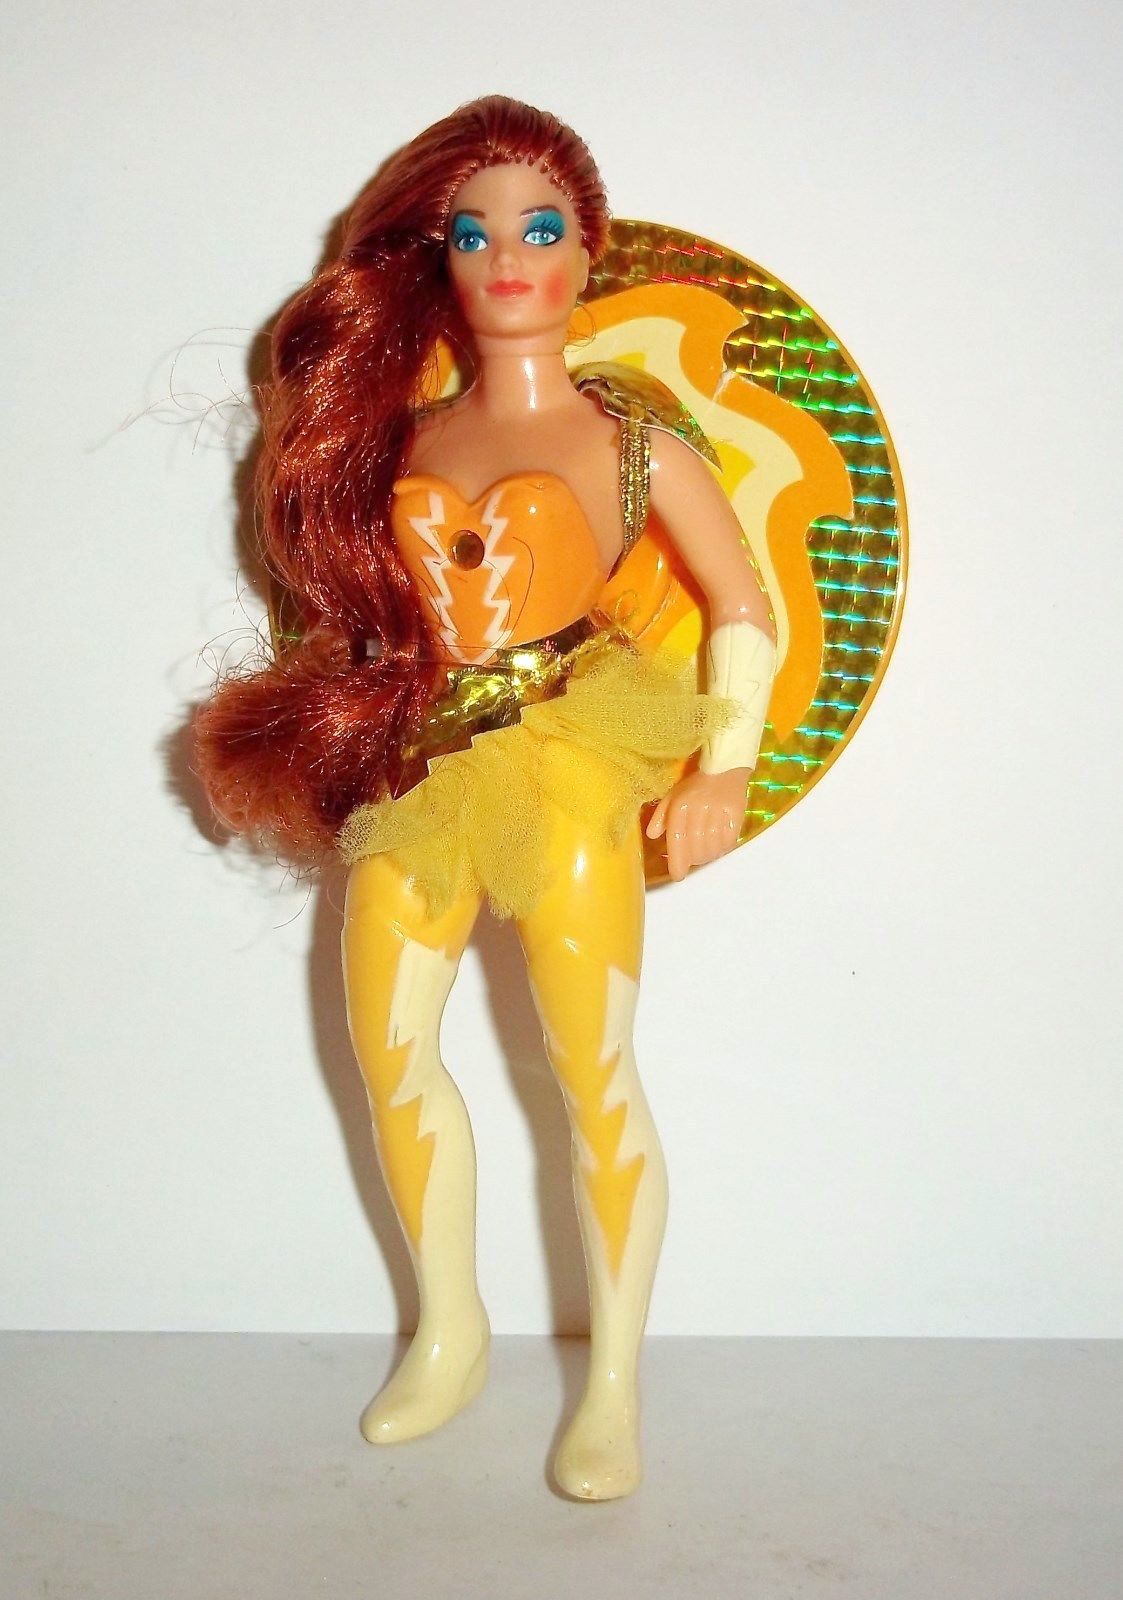 She-Ra: Princess of Power (1985) - (figures, dolls, toys and objects) 15